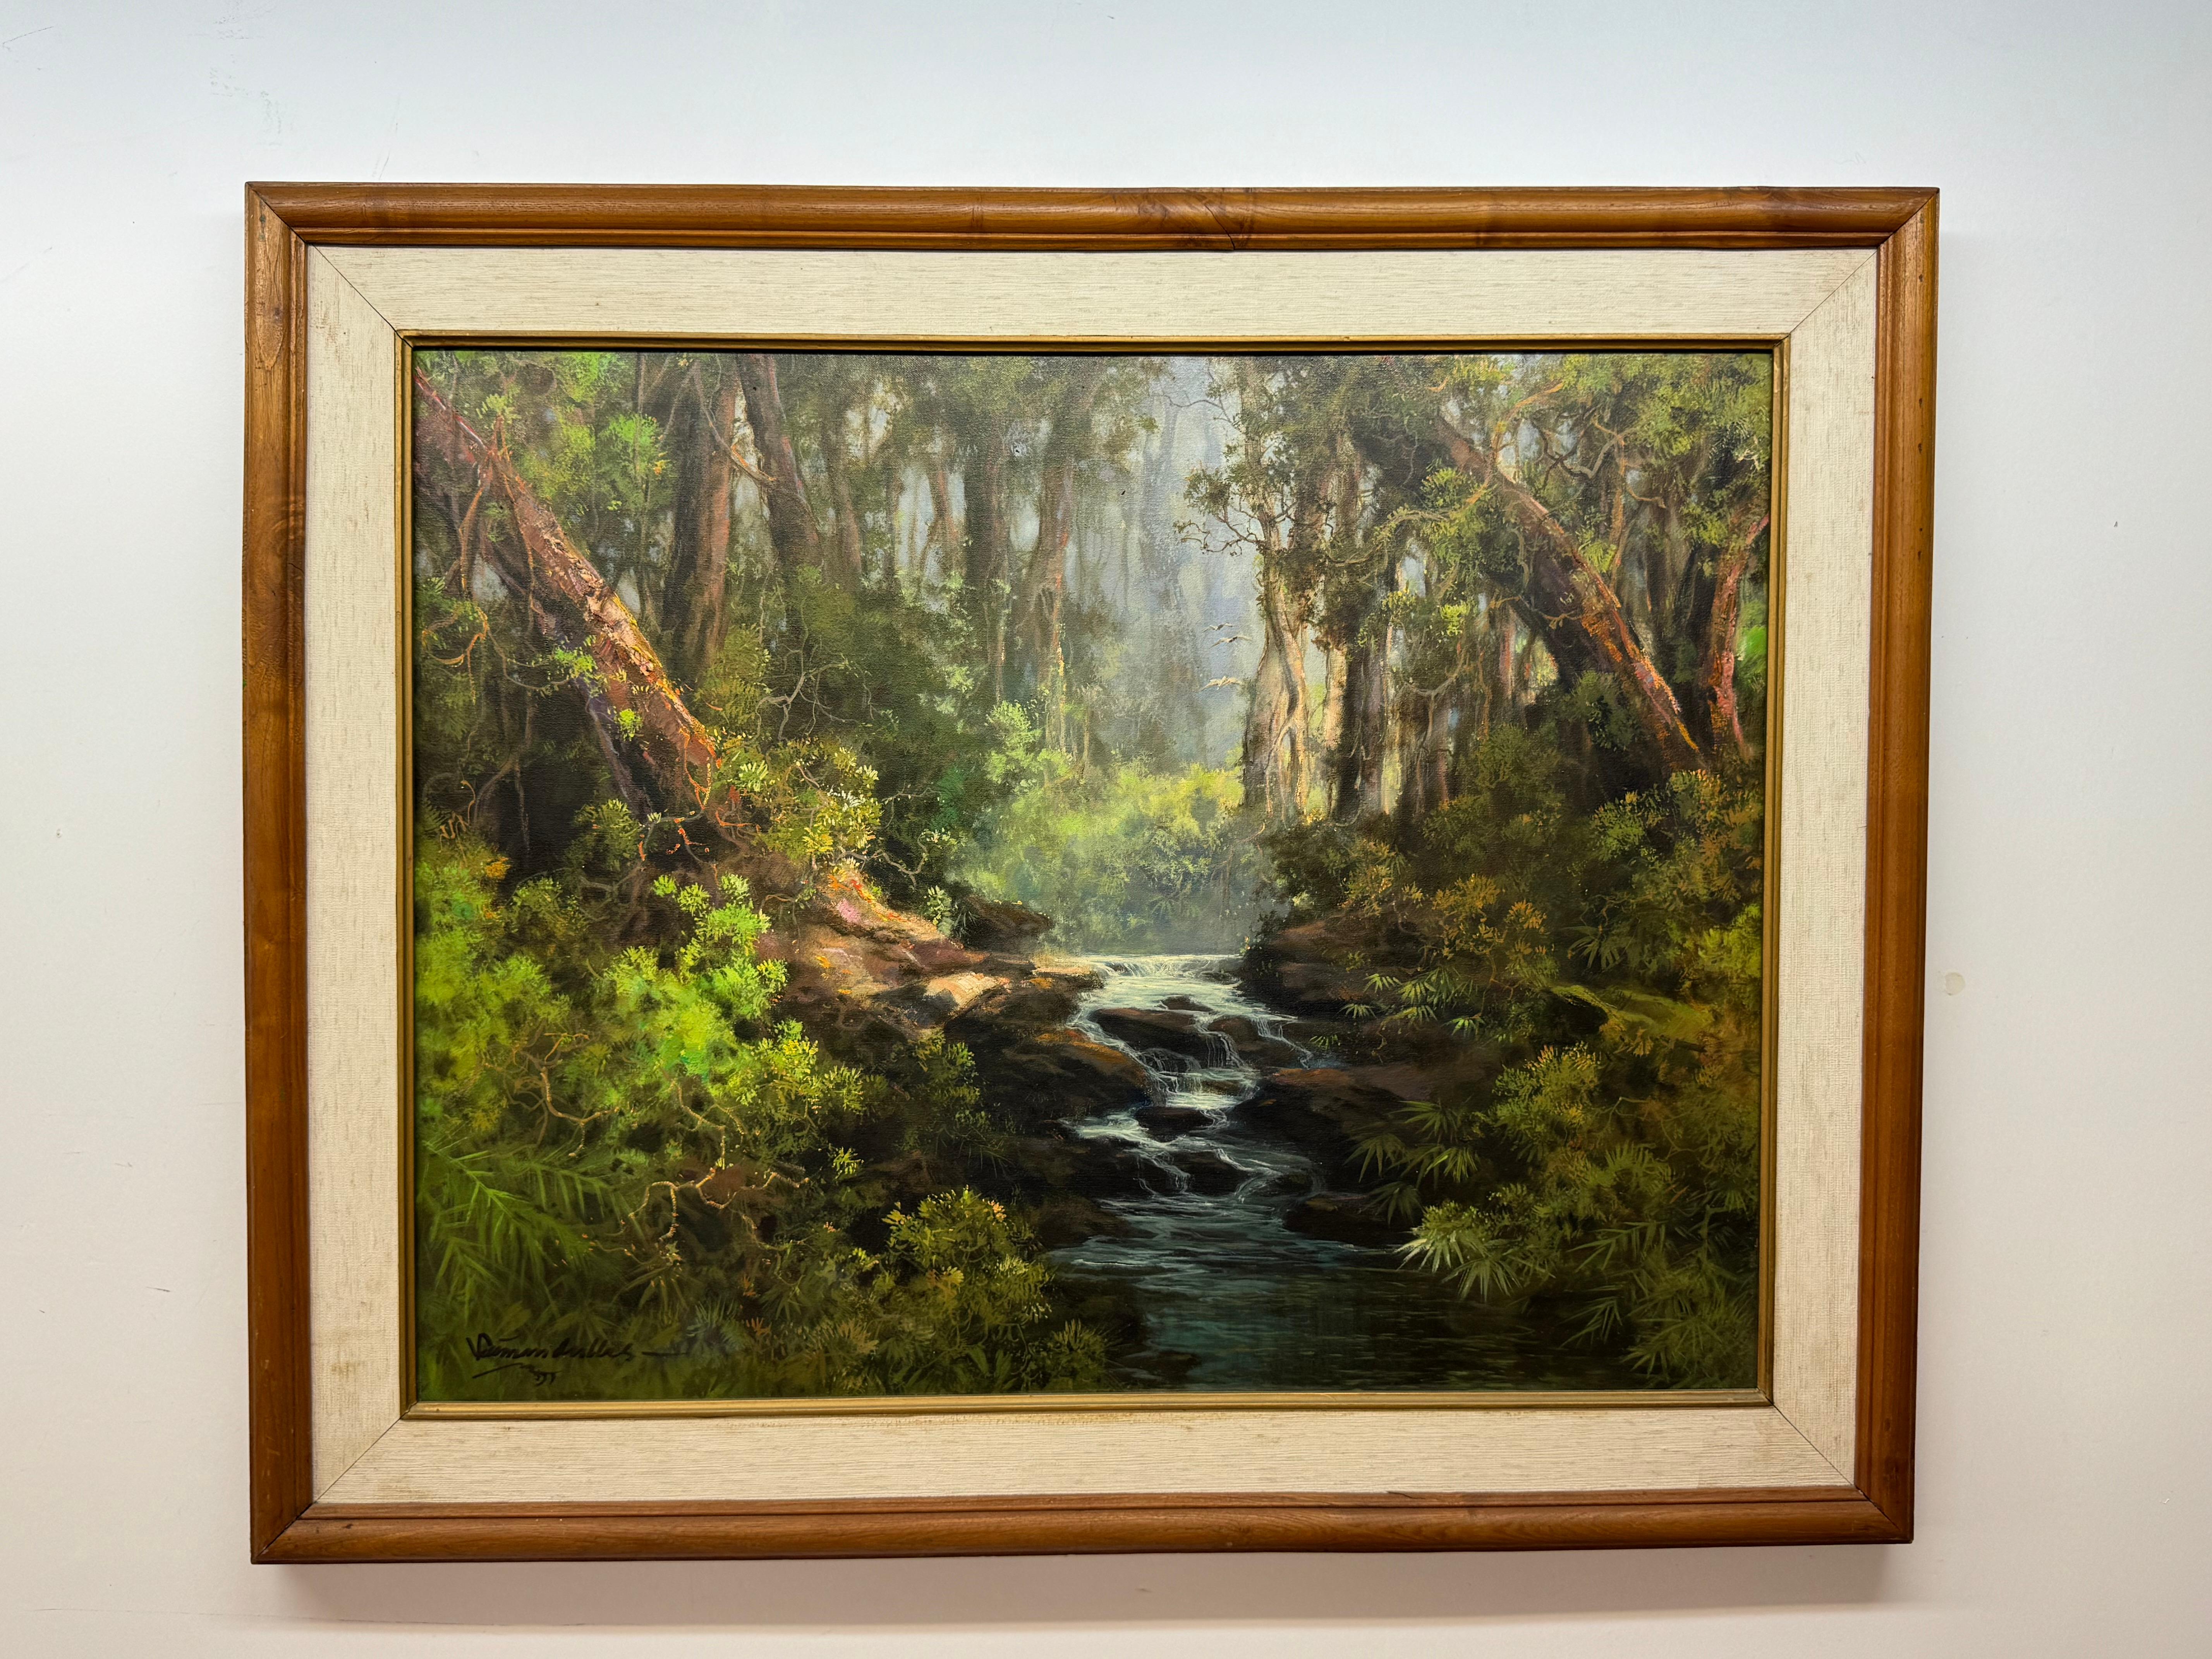 Saiman Dullah Landscape Painting - Beautiful, tropical, Wooded Forest Landscape with River Stream by Indonesian art